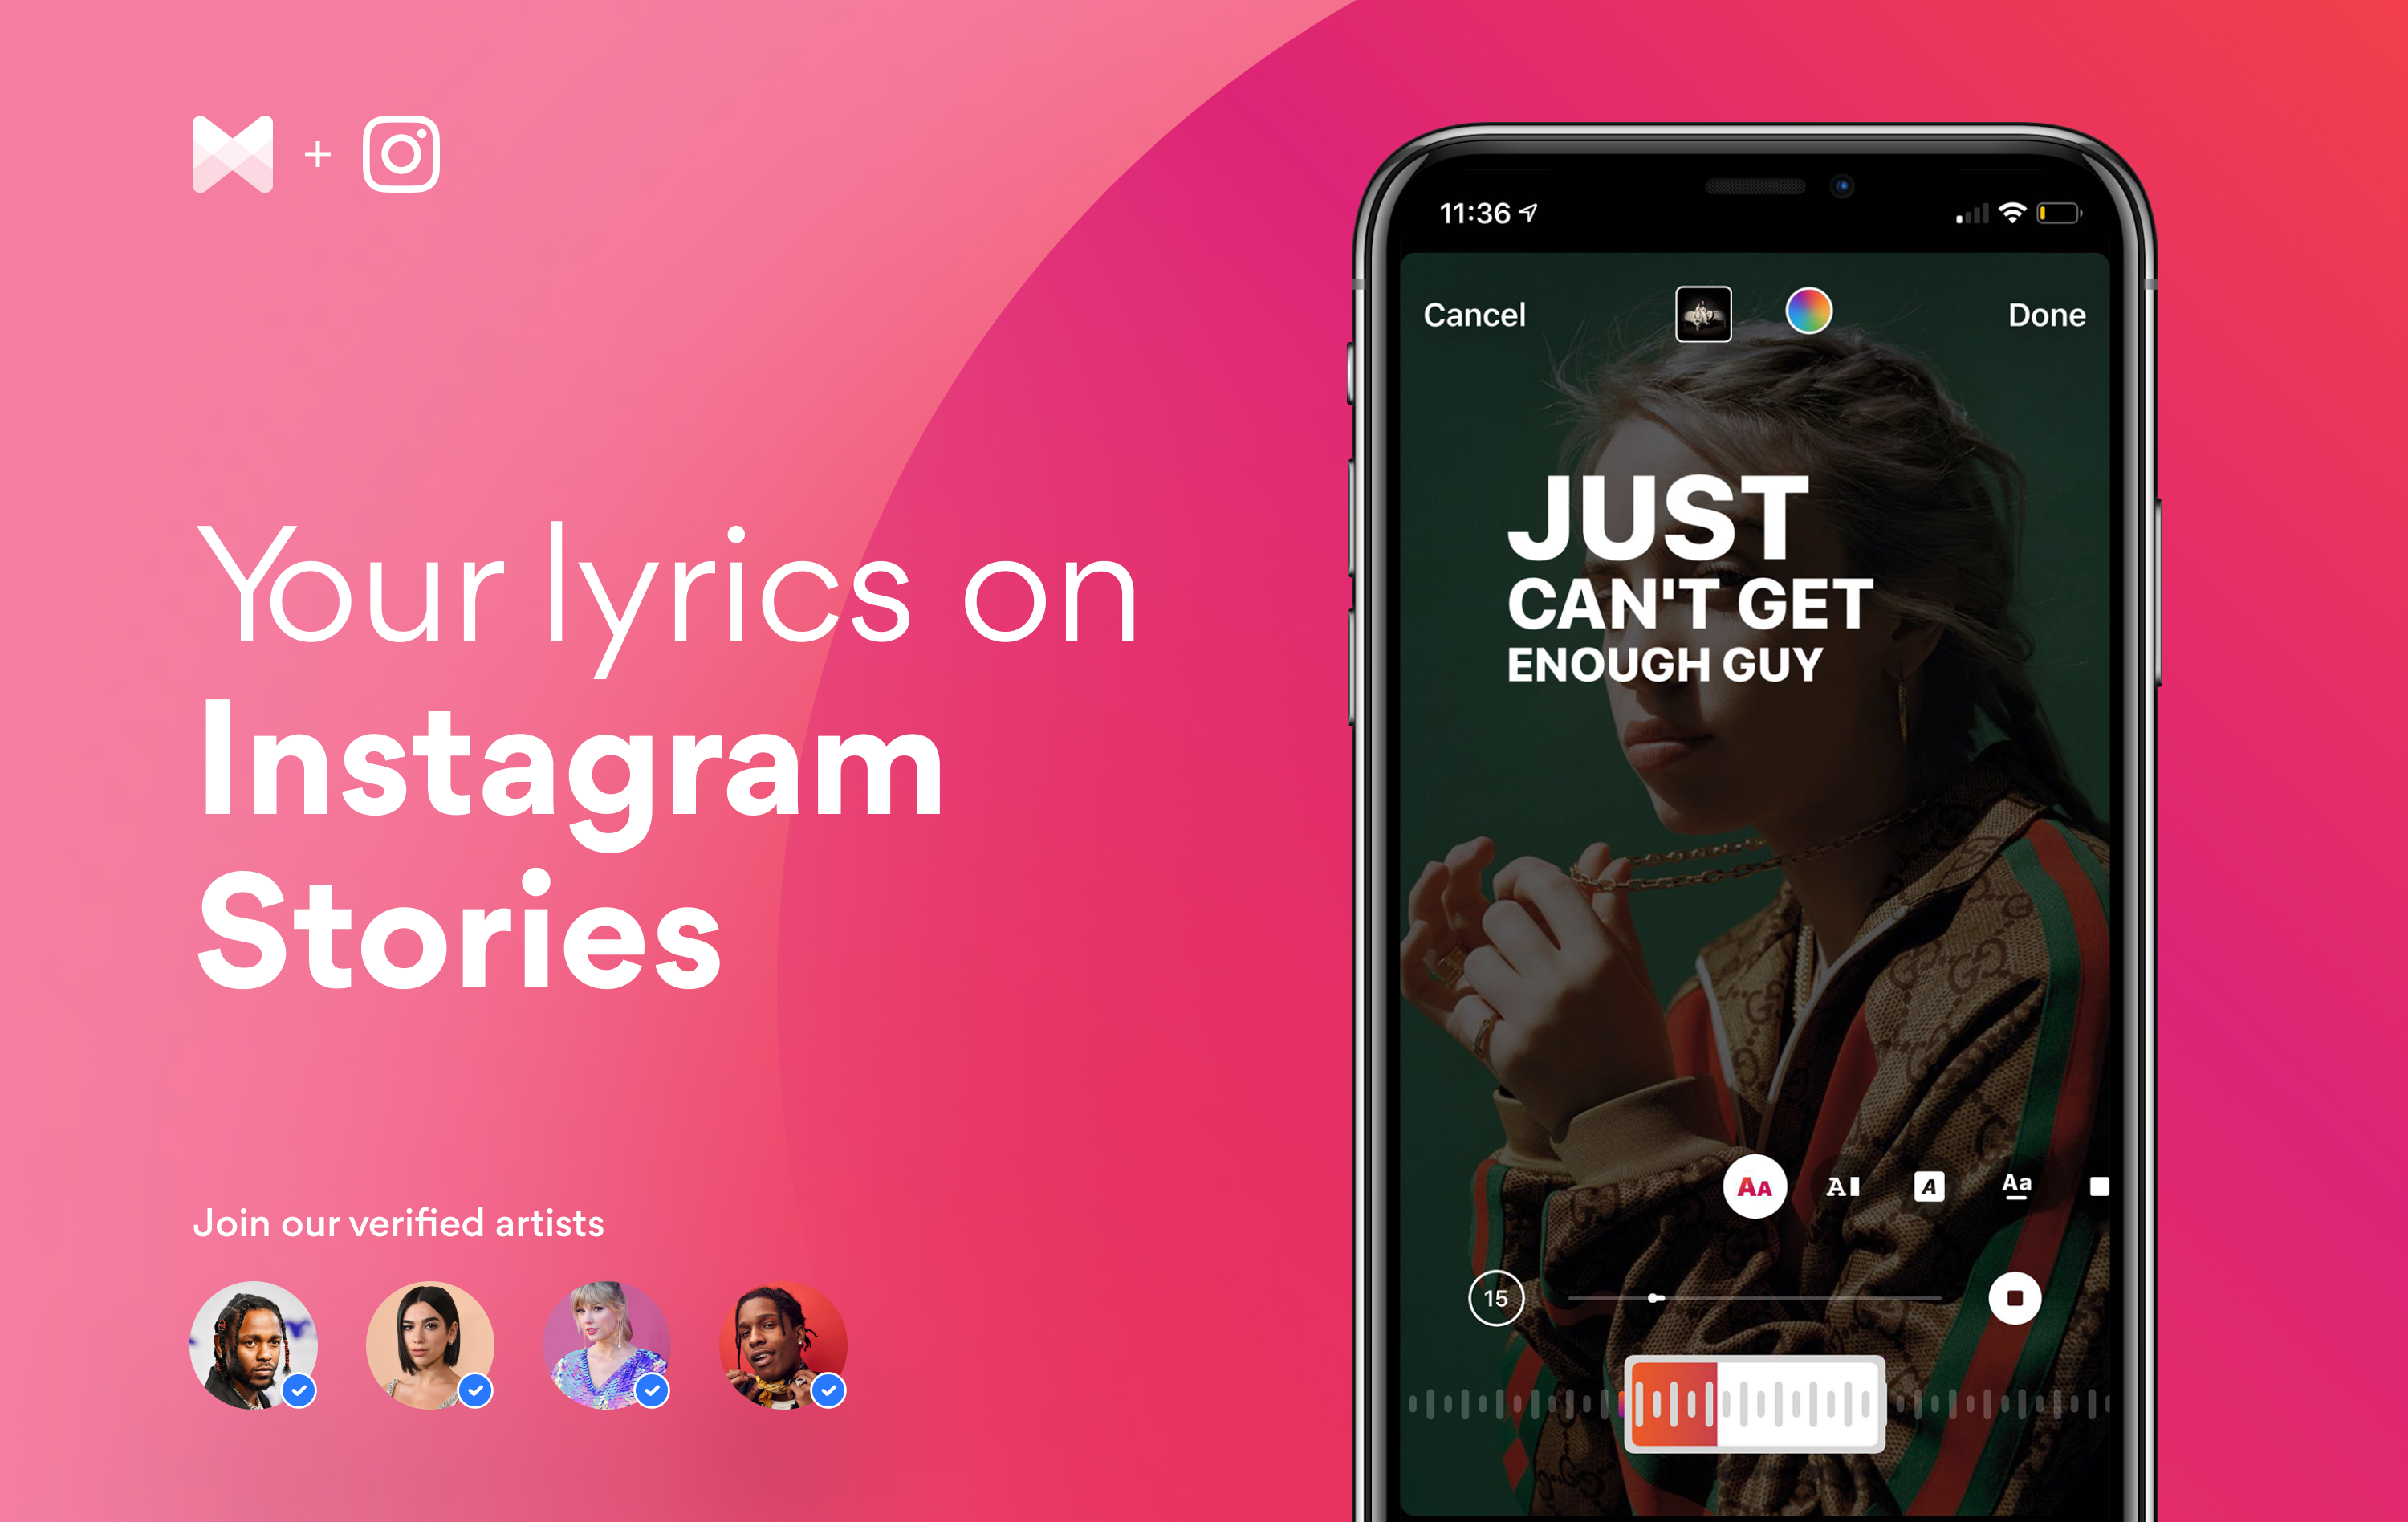 How to add lyrics to your songs on Instagram Stories